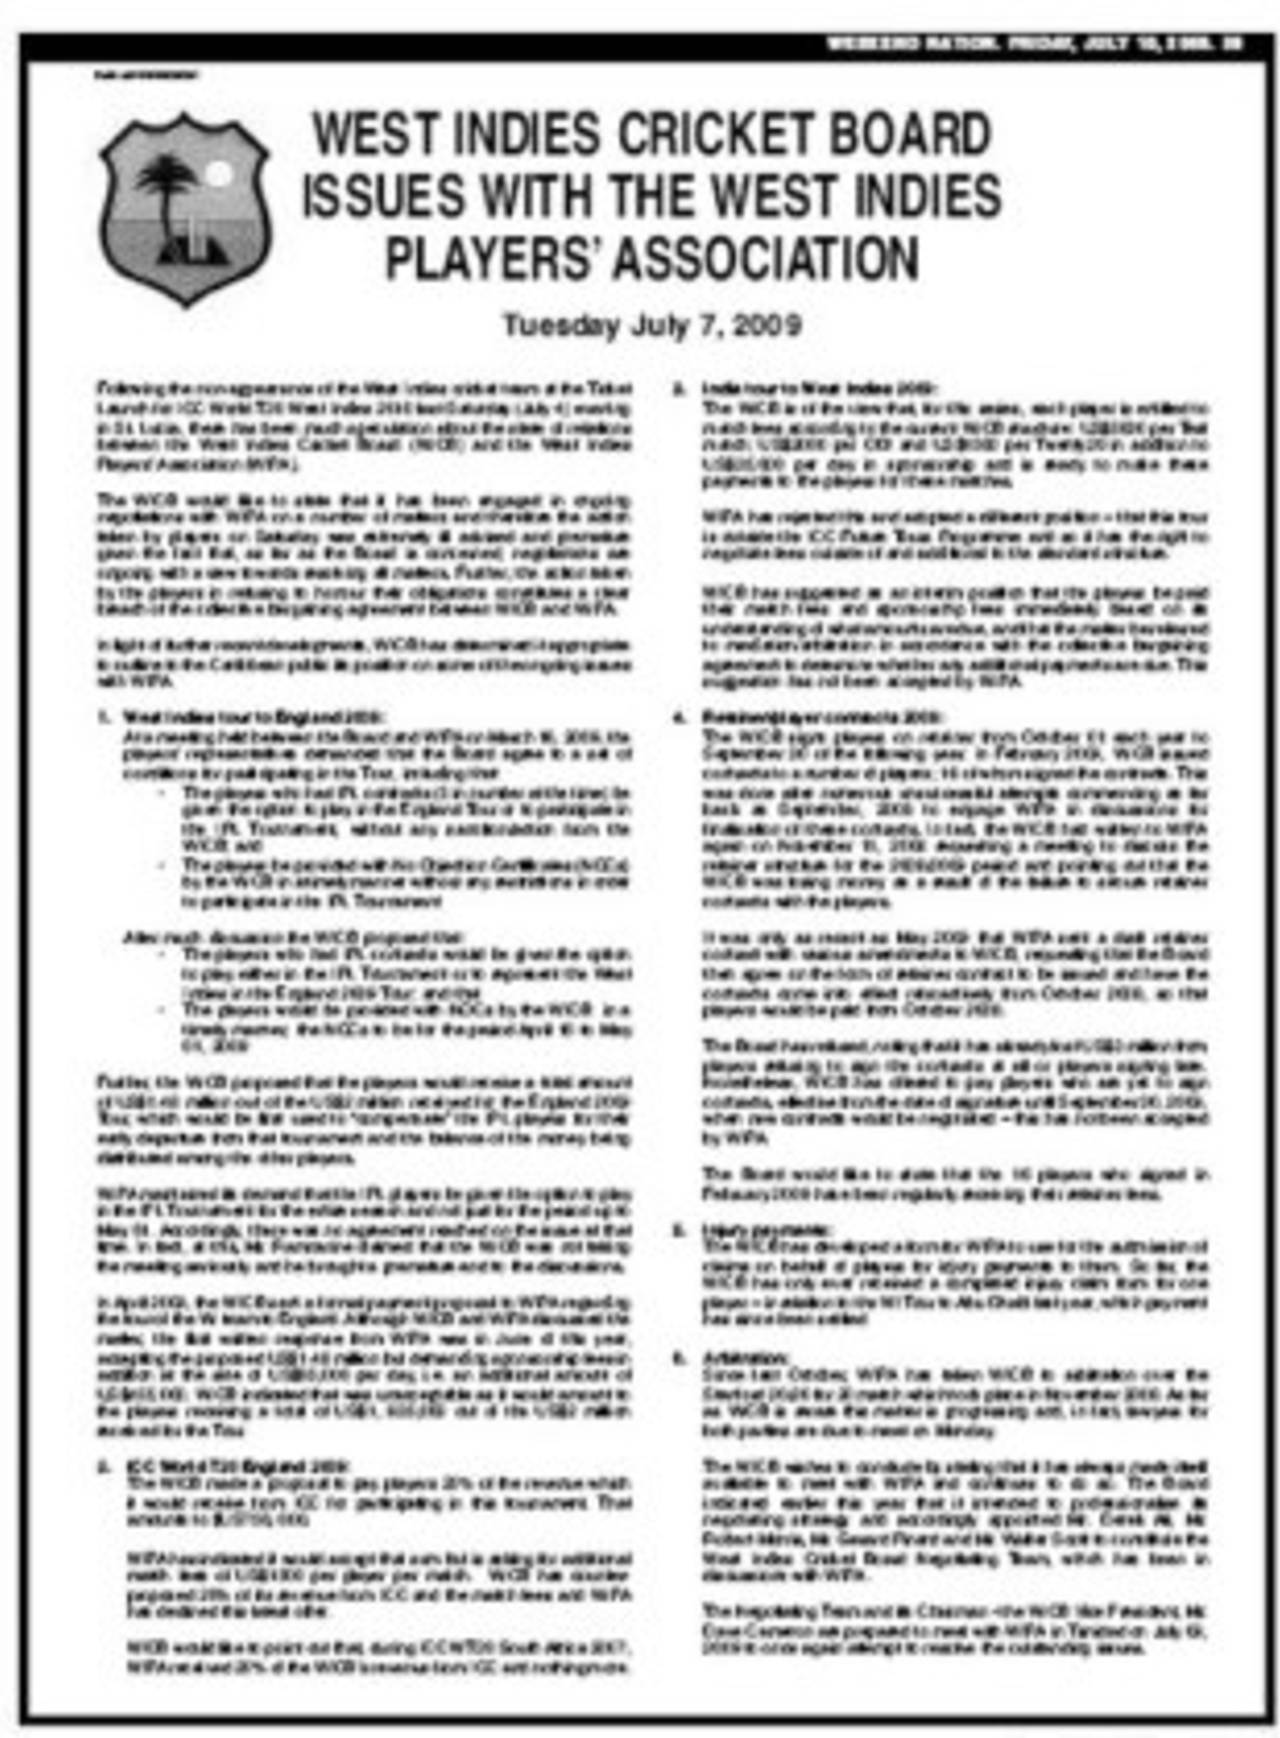 The WICB's full-page advertisement in the <I>Nation</I>&nbsp;&nbsp;&bull;&nbsp;&nbsp;The Nation